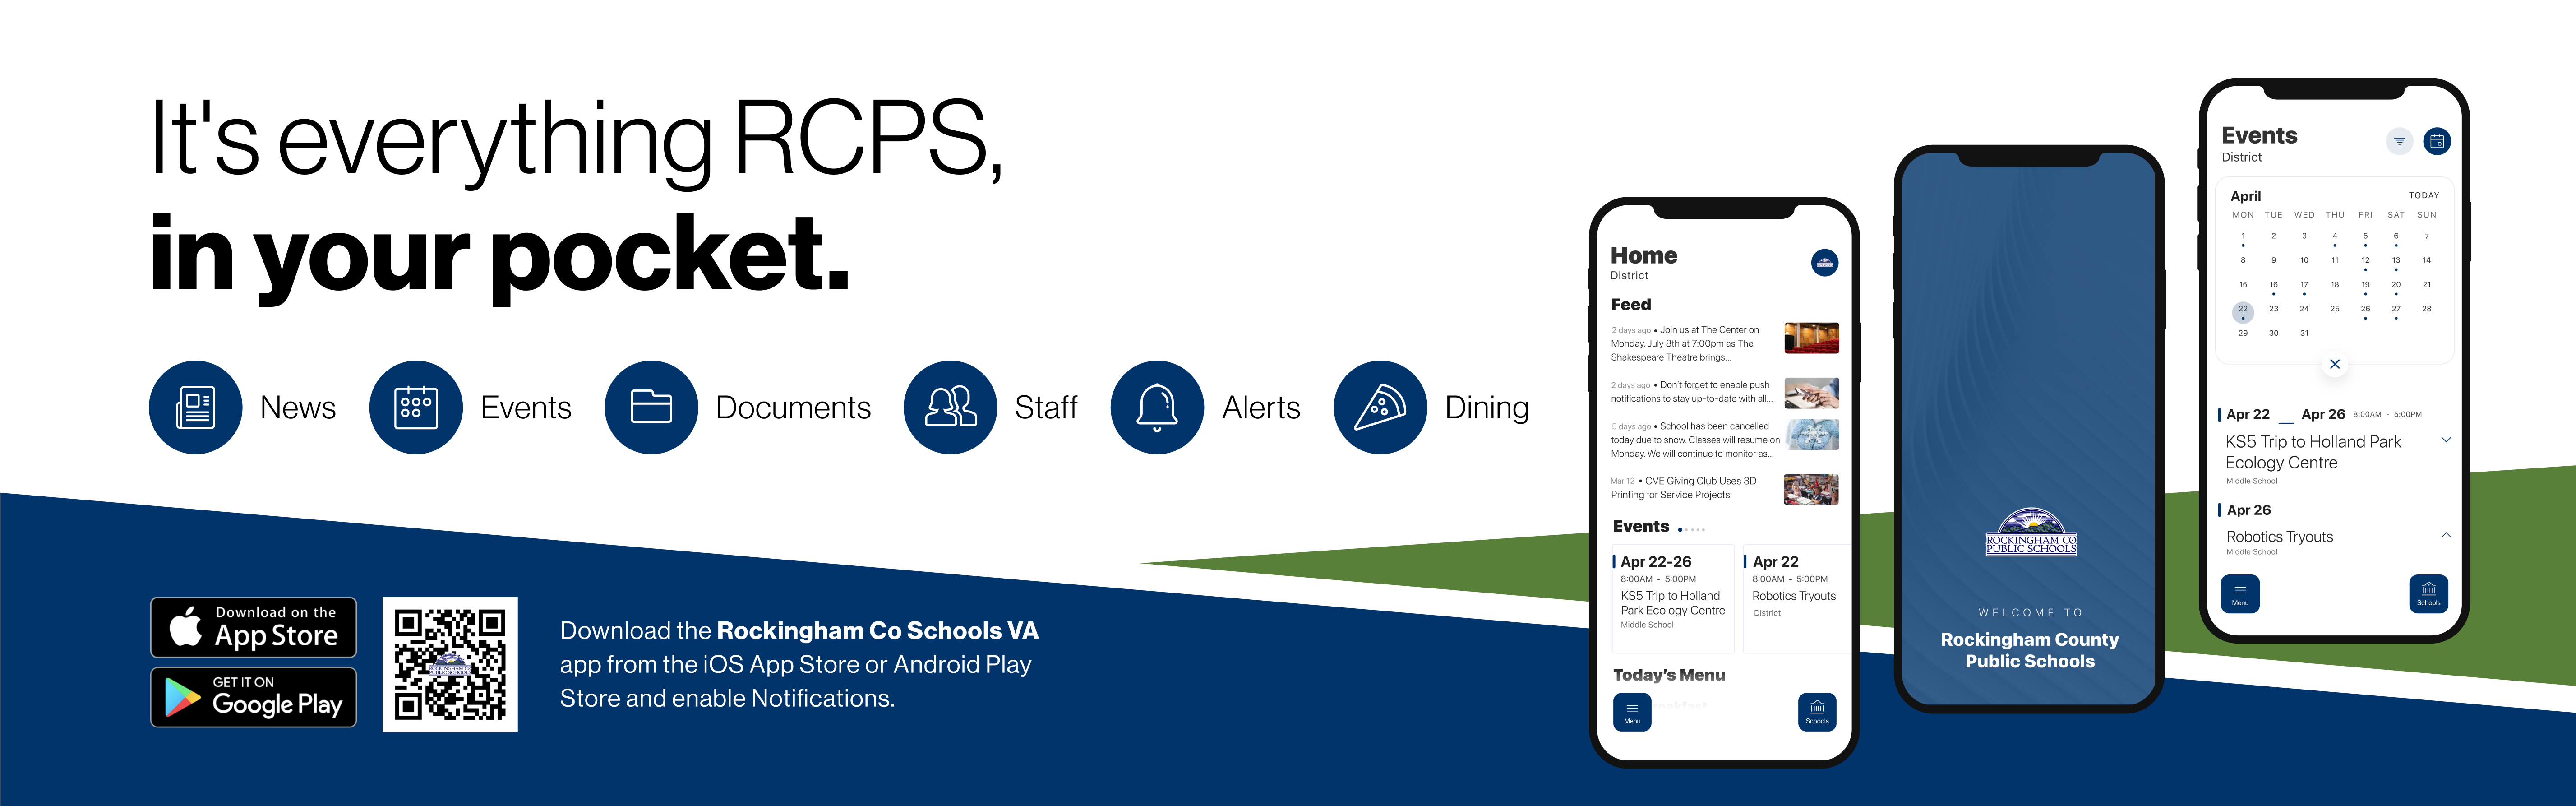 It's everything RCPS, in your pocket. Download the Rockingham Co Schools VA app from the iOS App Store or Android Play Store and enable Notifications.